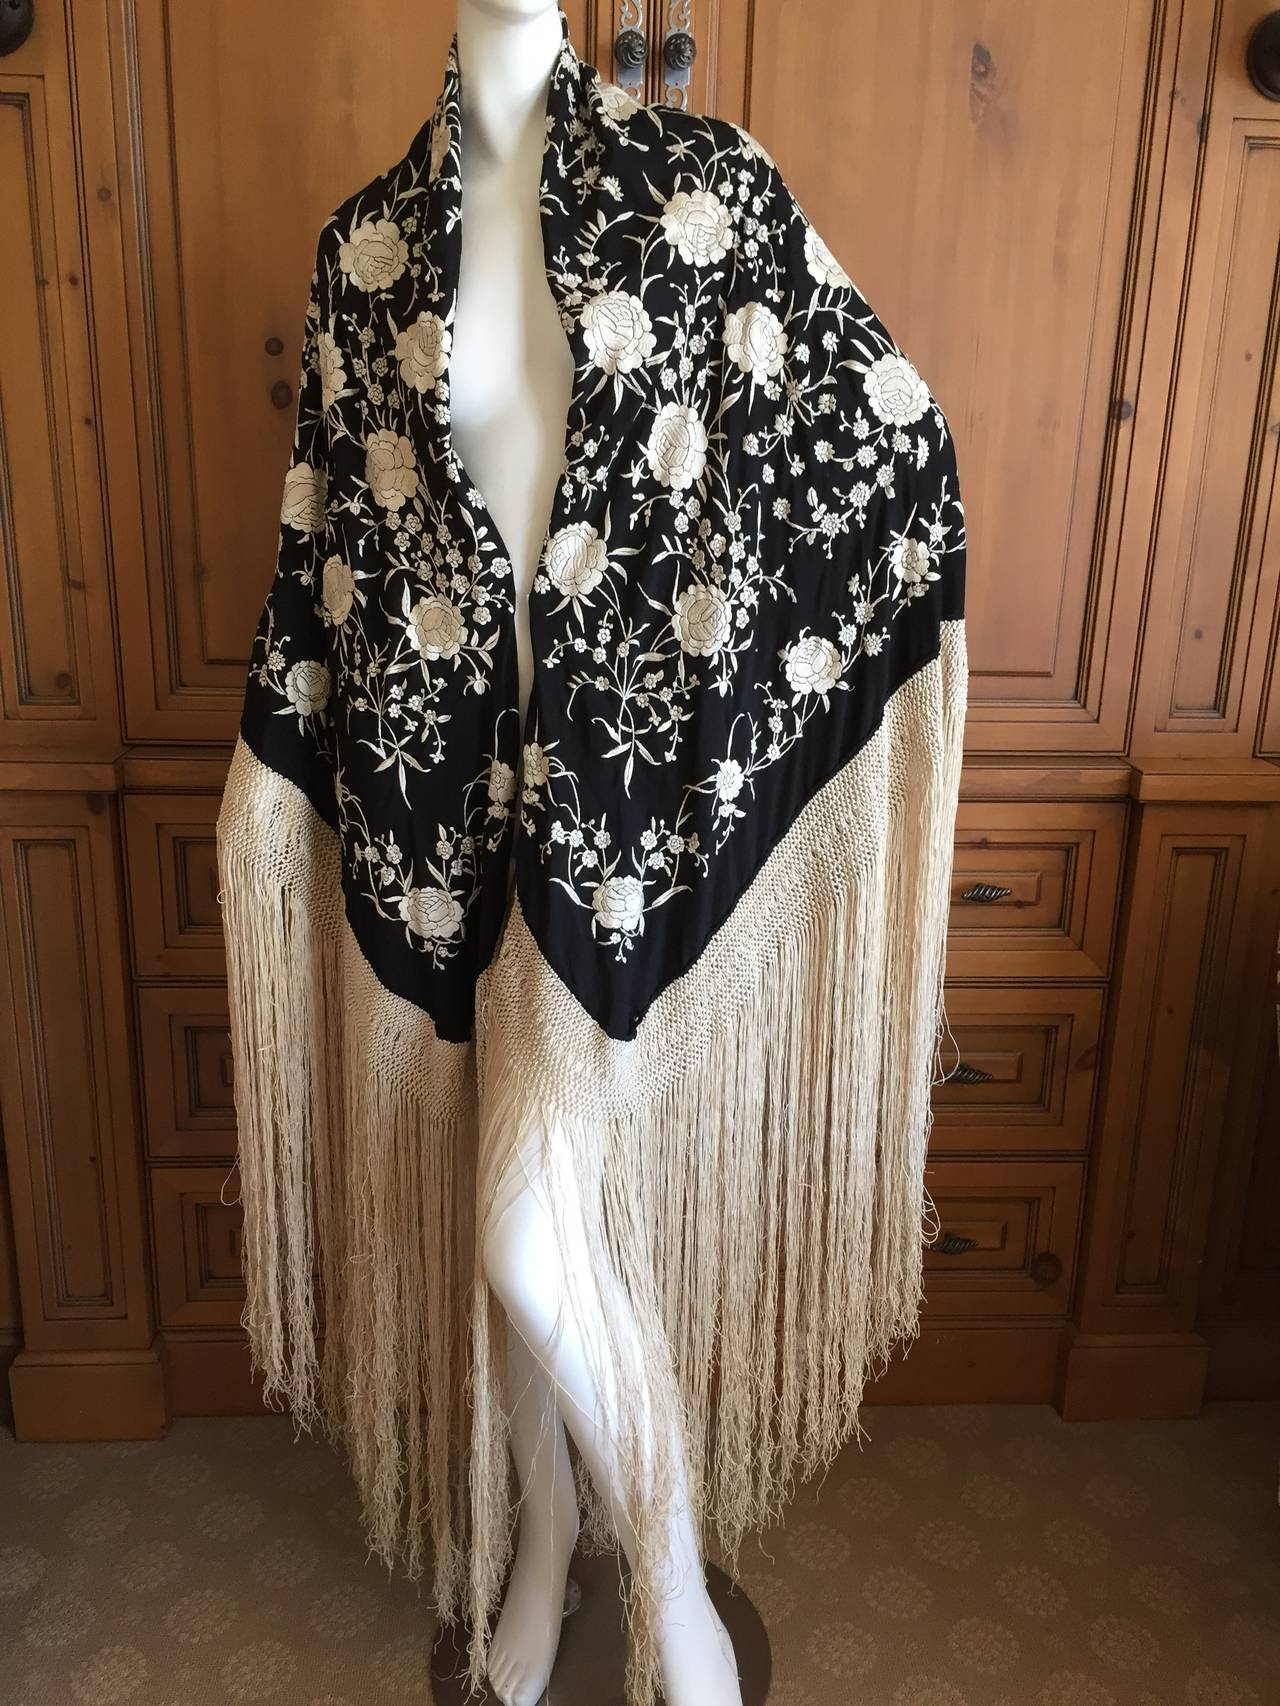 Vintage Canton Fringed Black and White Piano Shawl
This measures 50